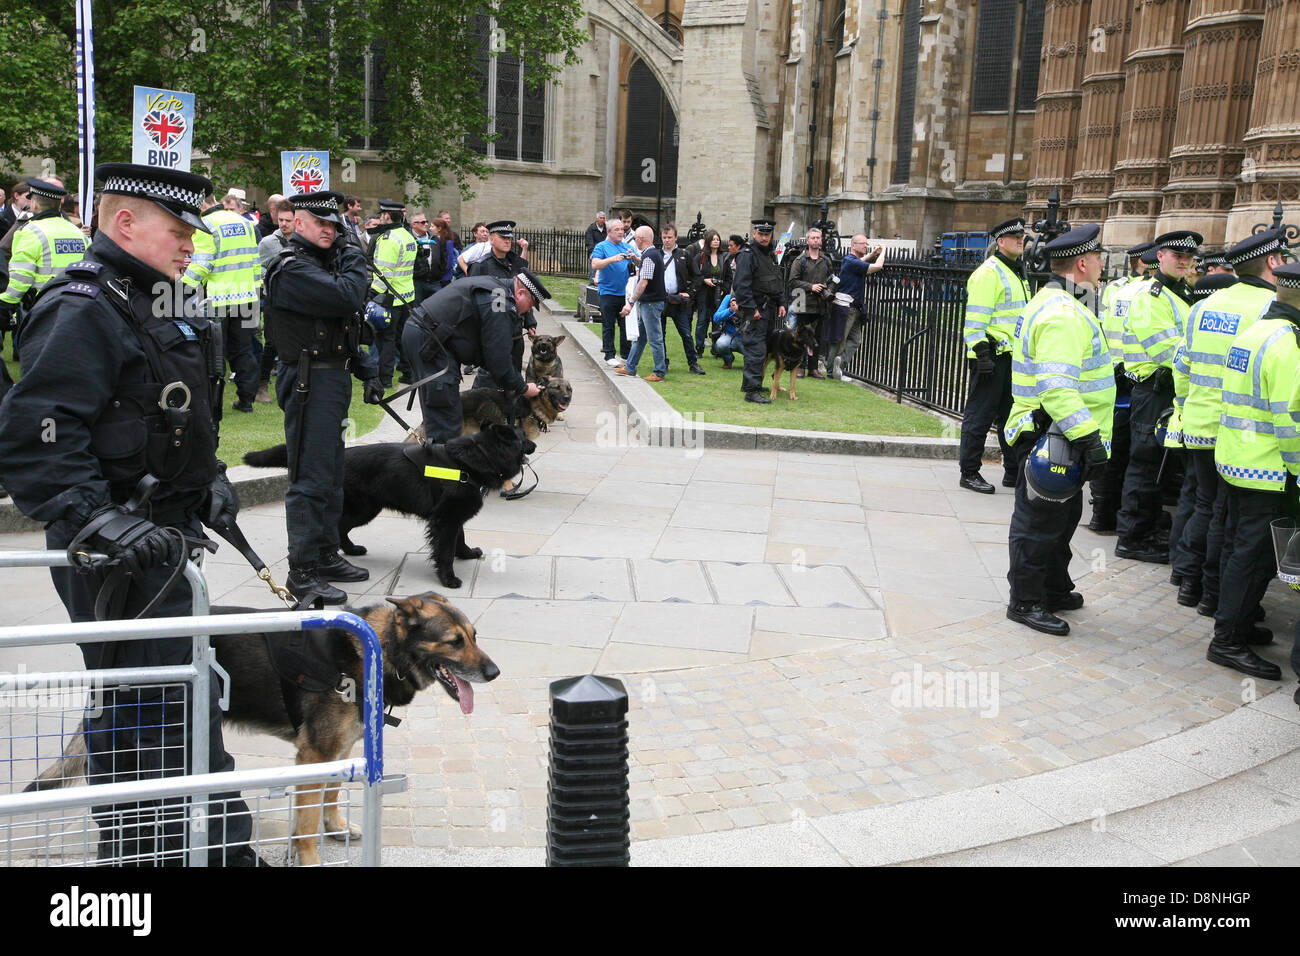 London, UK. 1st June, 2013. BNP march halted by a large group of anti-fascist protesters  Credit:  Mario Mitsis / Alamy Live News Stock Photo